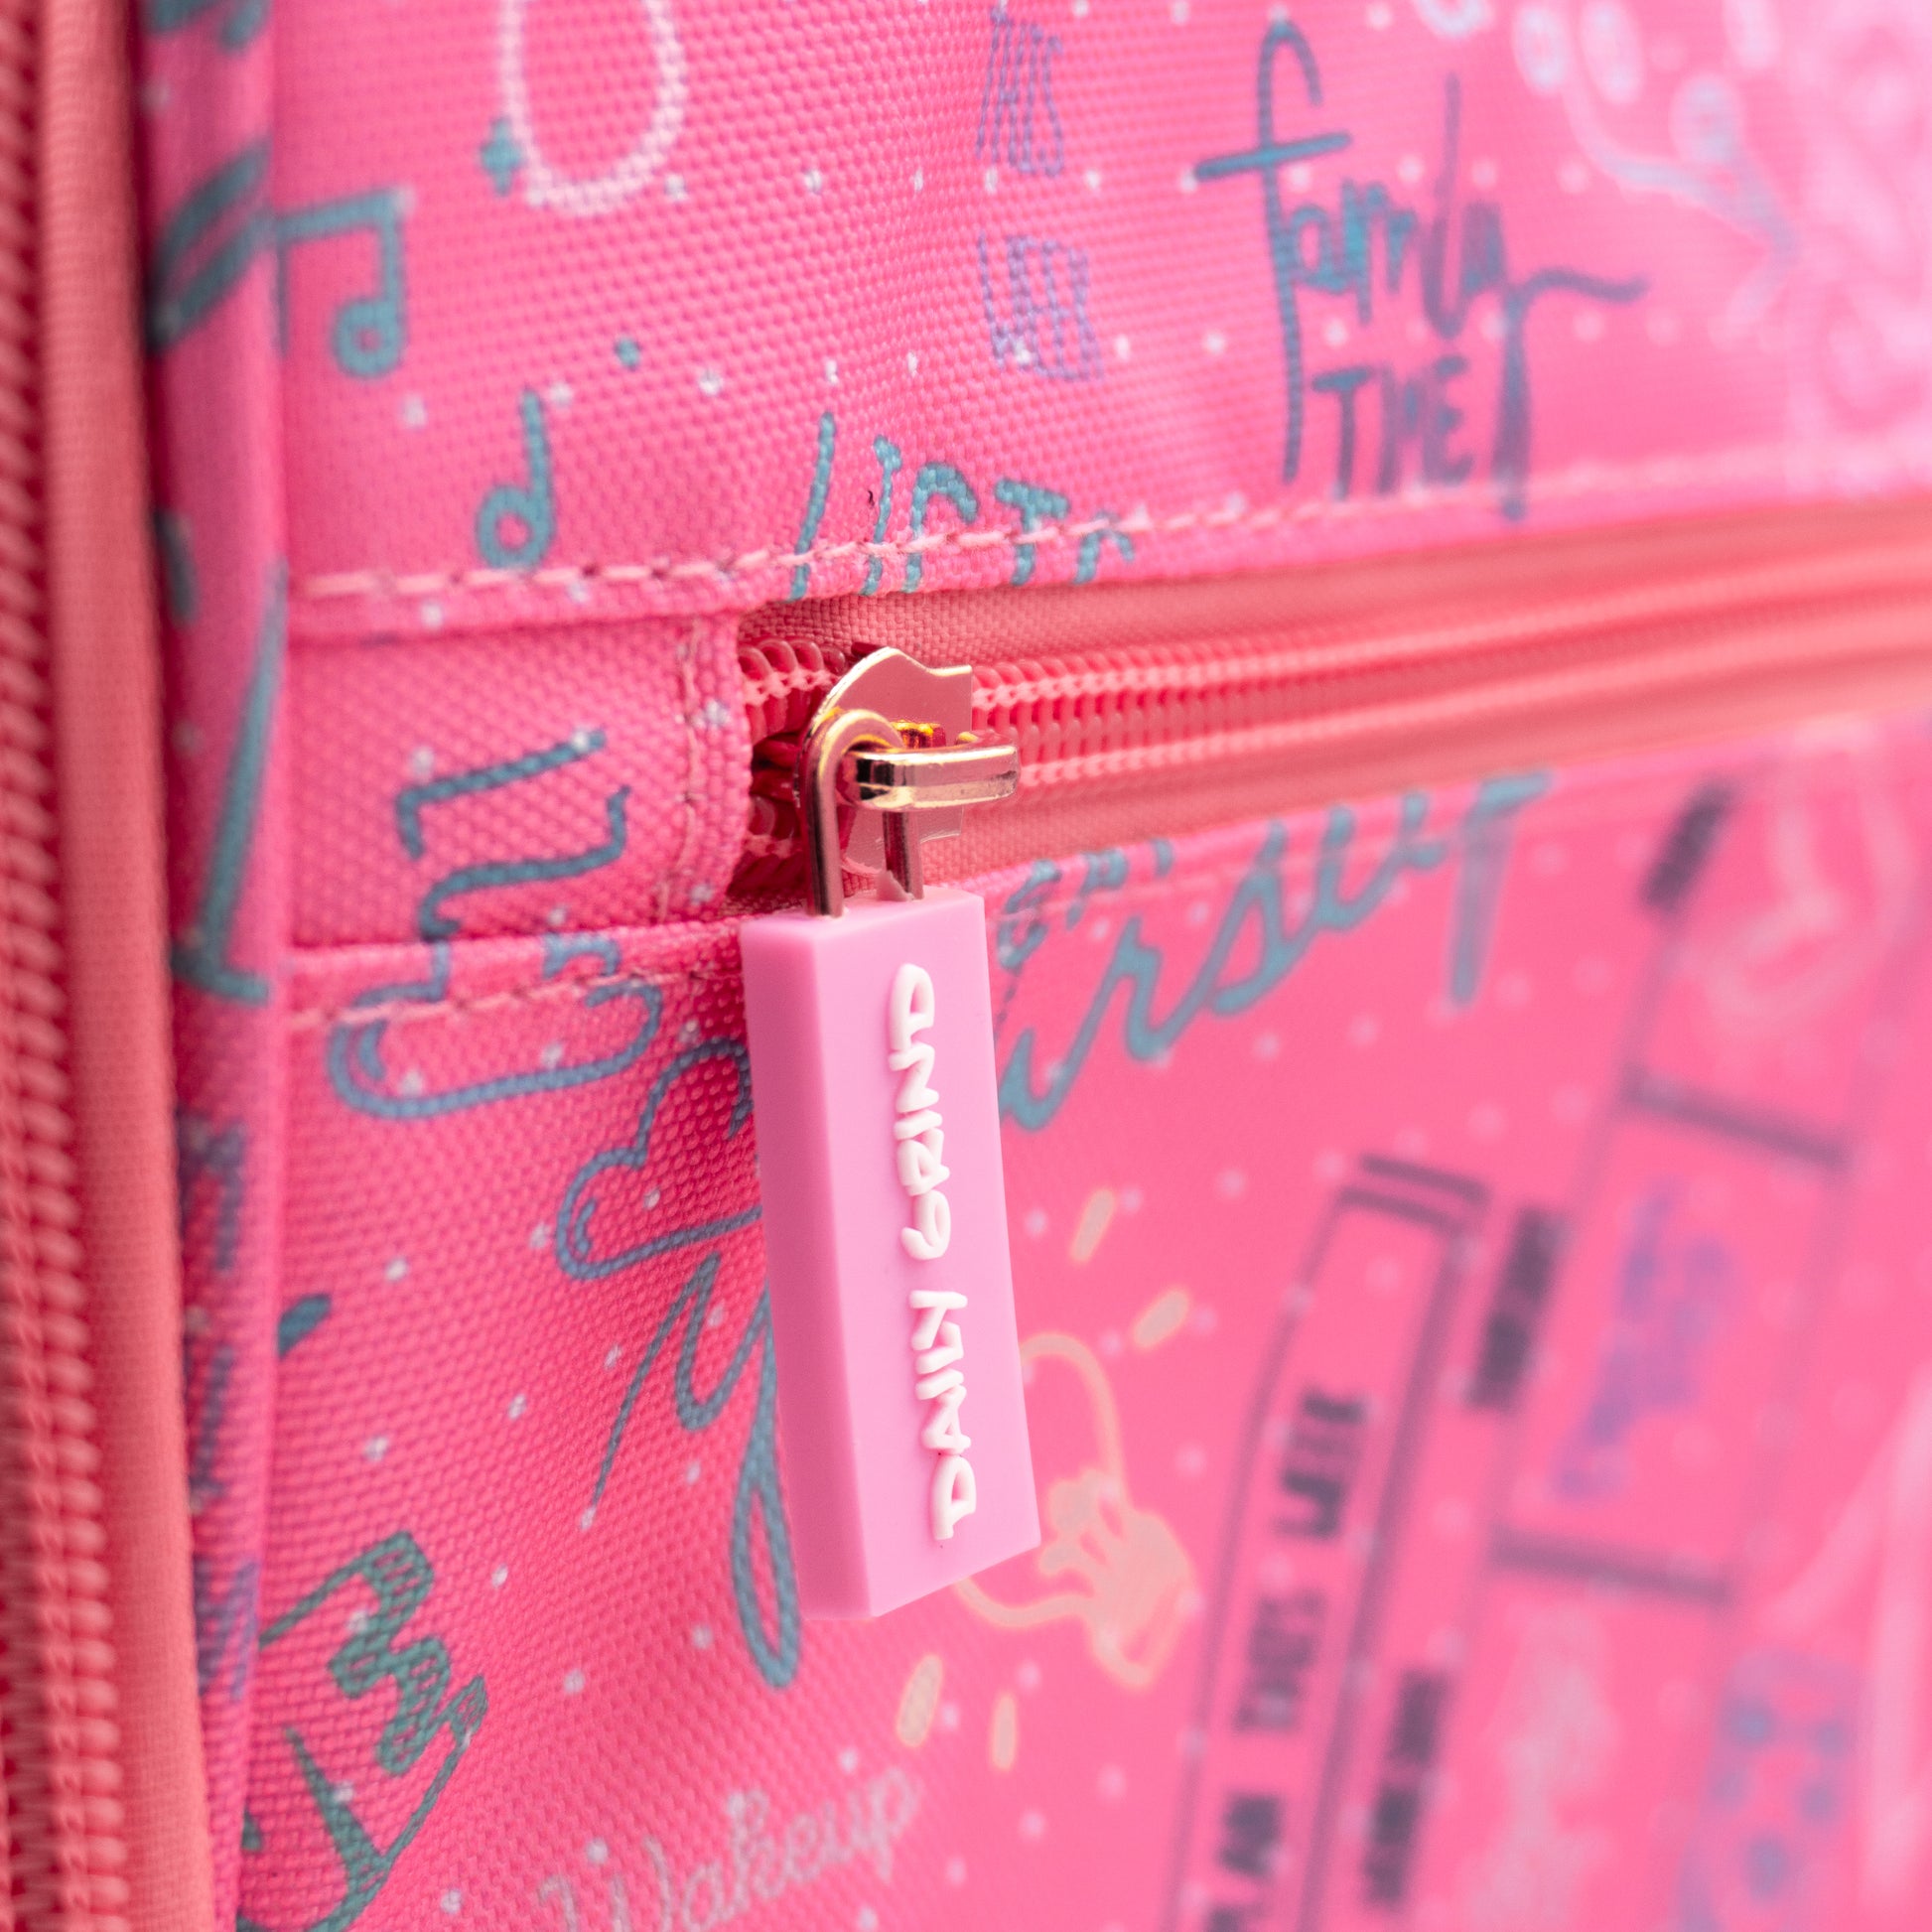 Close up of "Daily Grind" pink zipper detail